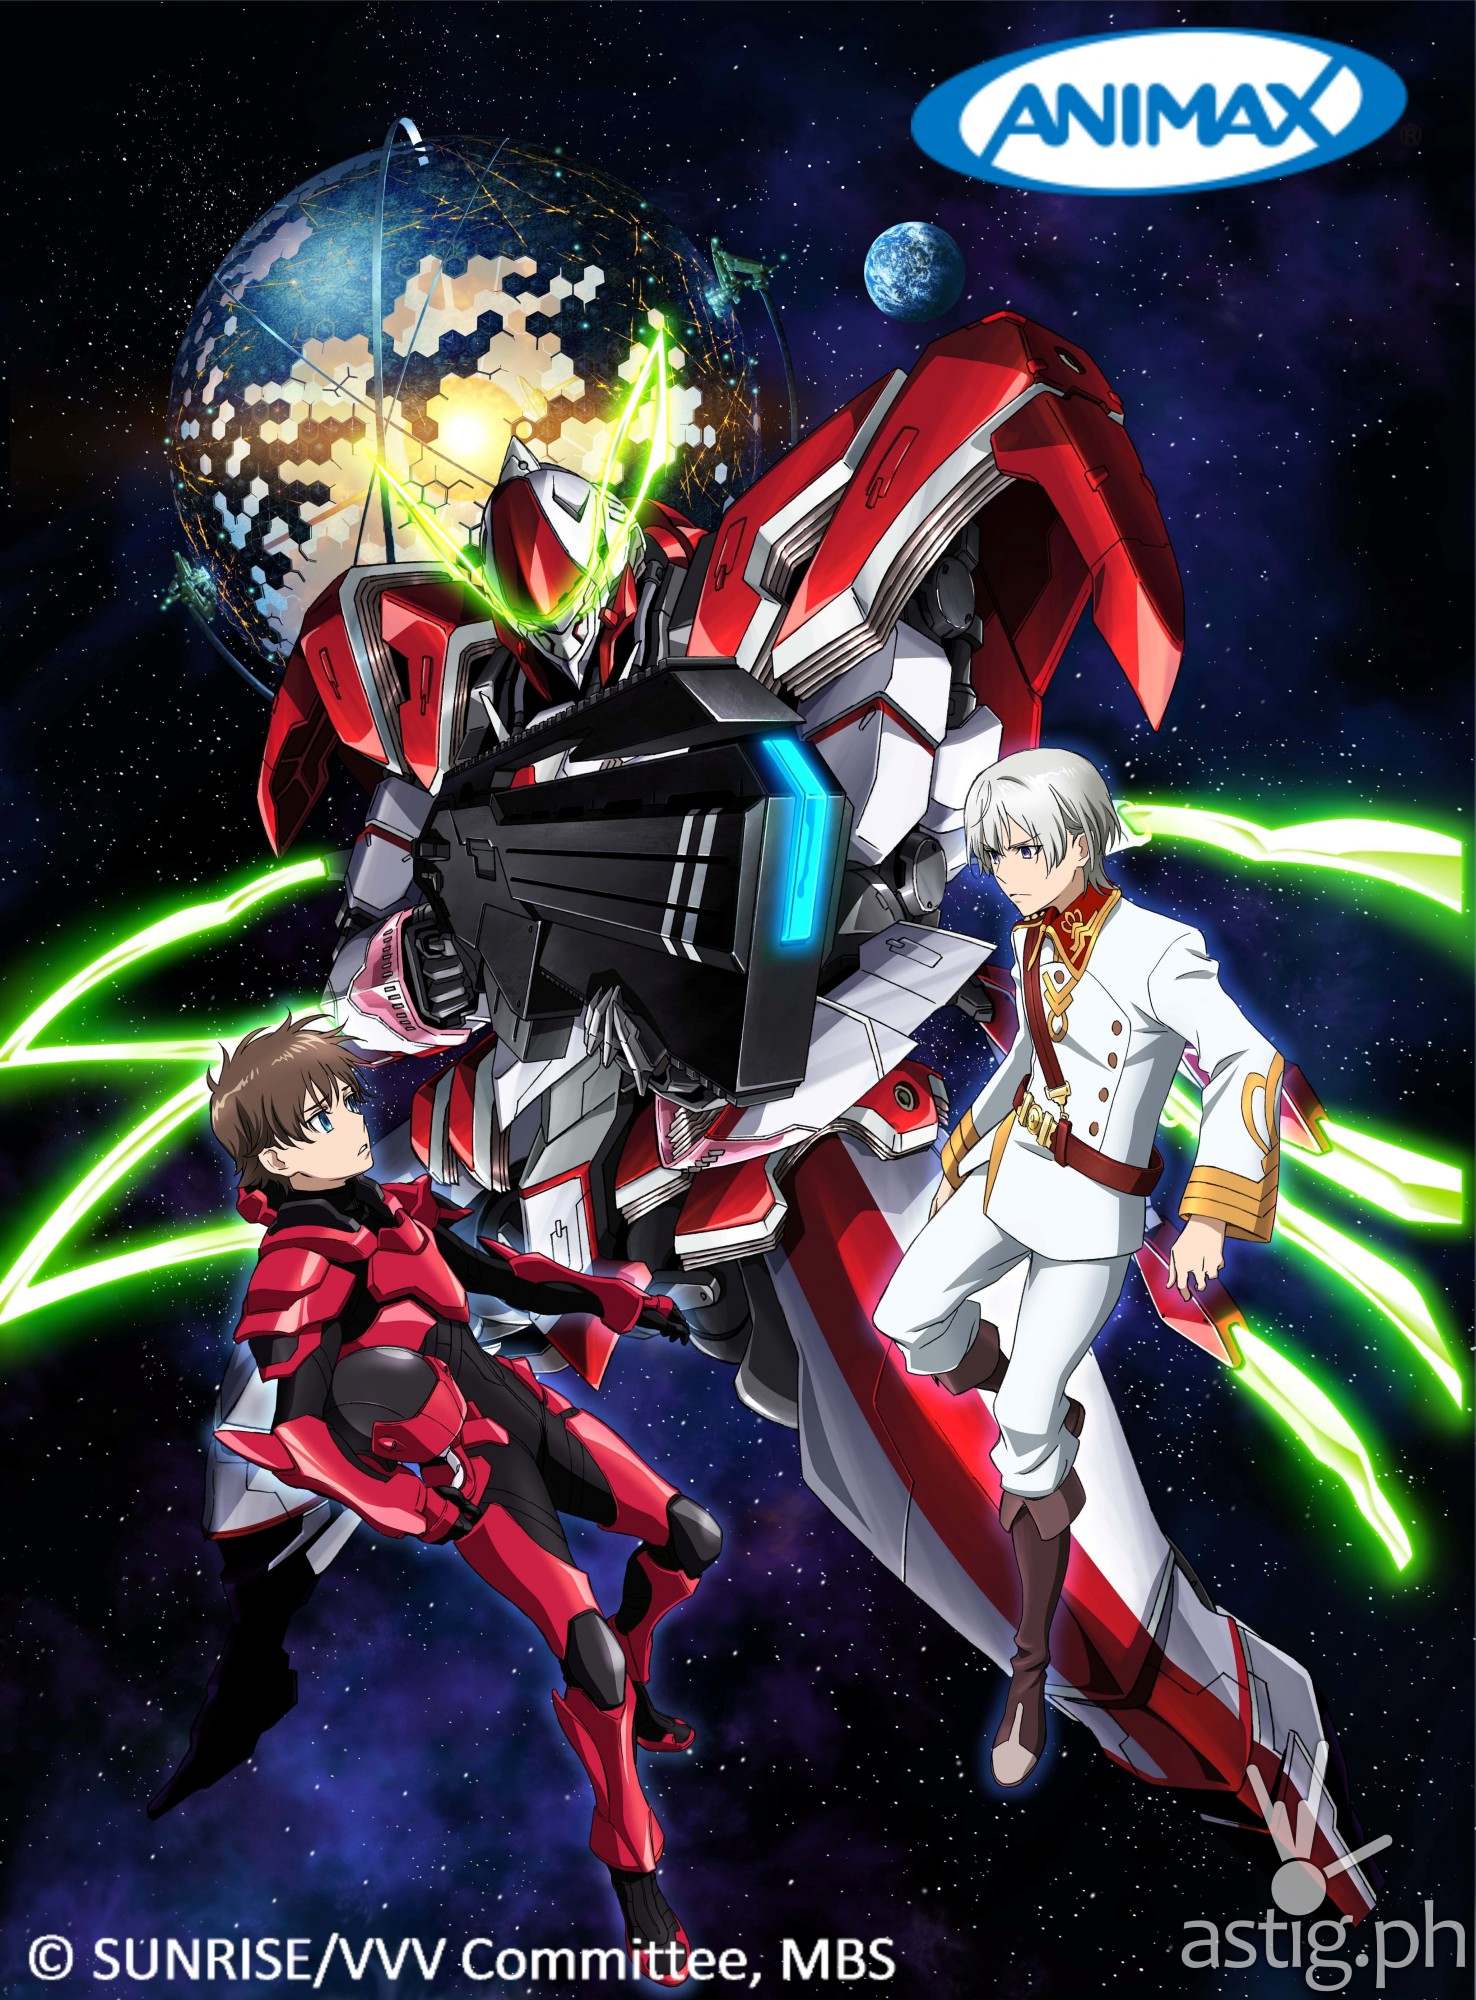 Action-packed mecha anime 